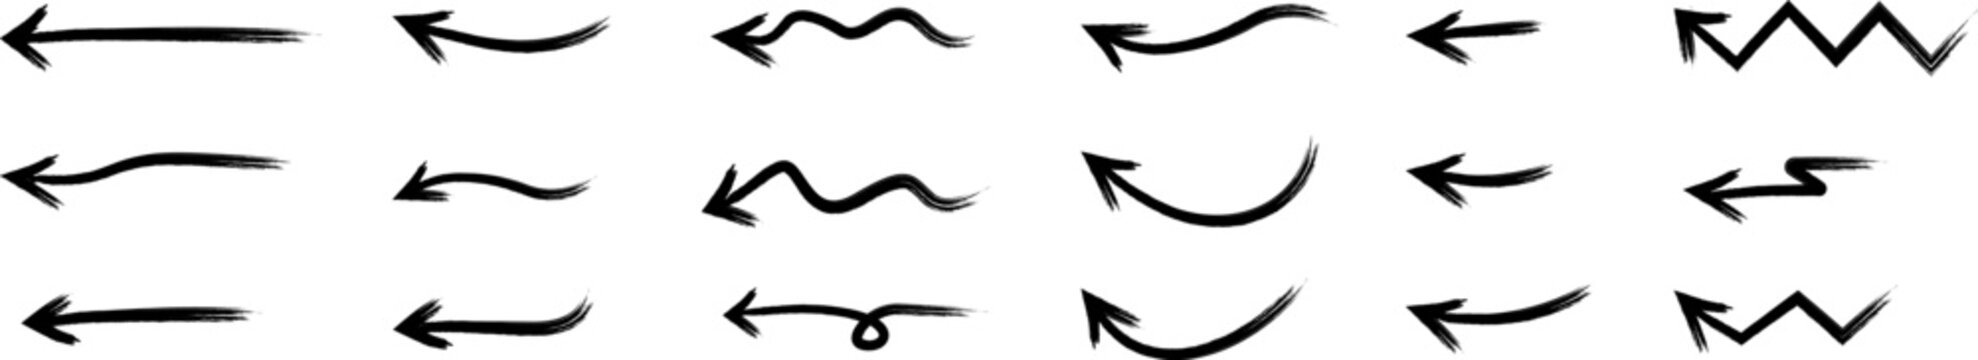 Set of simple hand drawn grunge arrows . Vector grunge arrows mark icons . Black simple grunge arrows collection .Grunge pointer.	